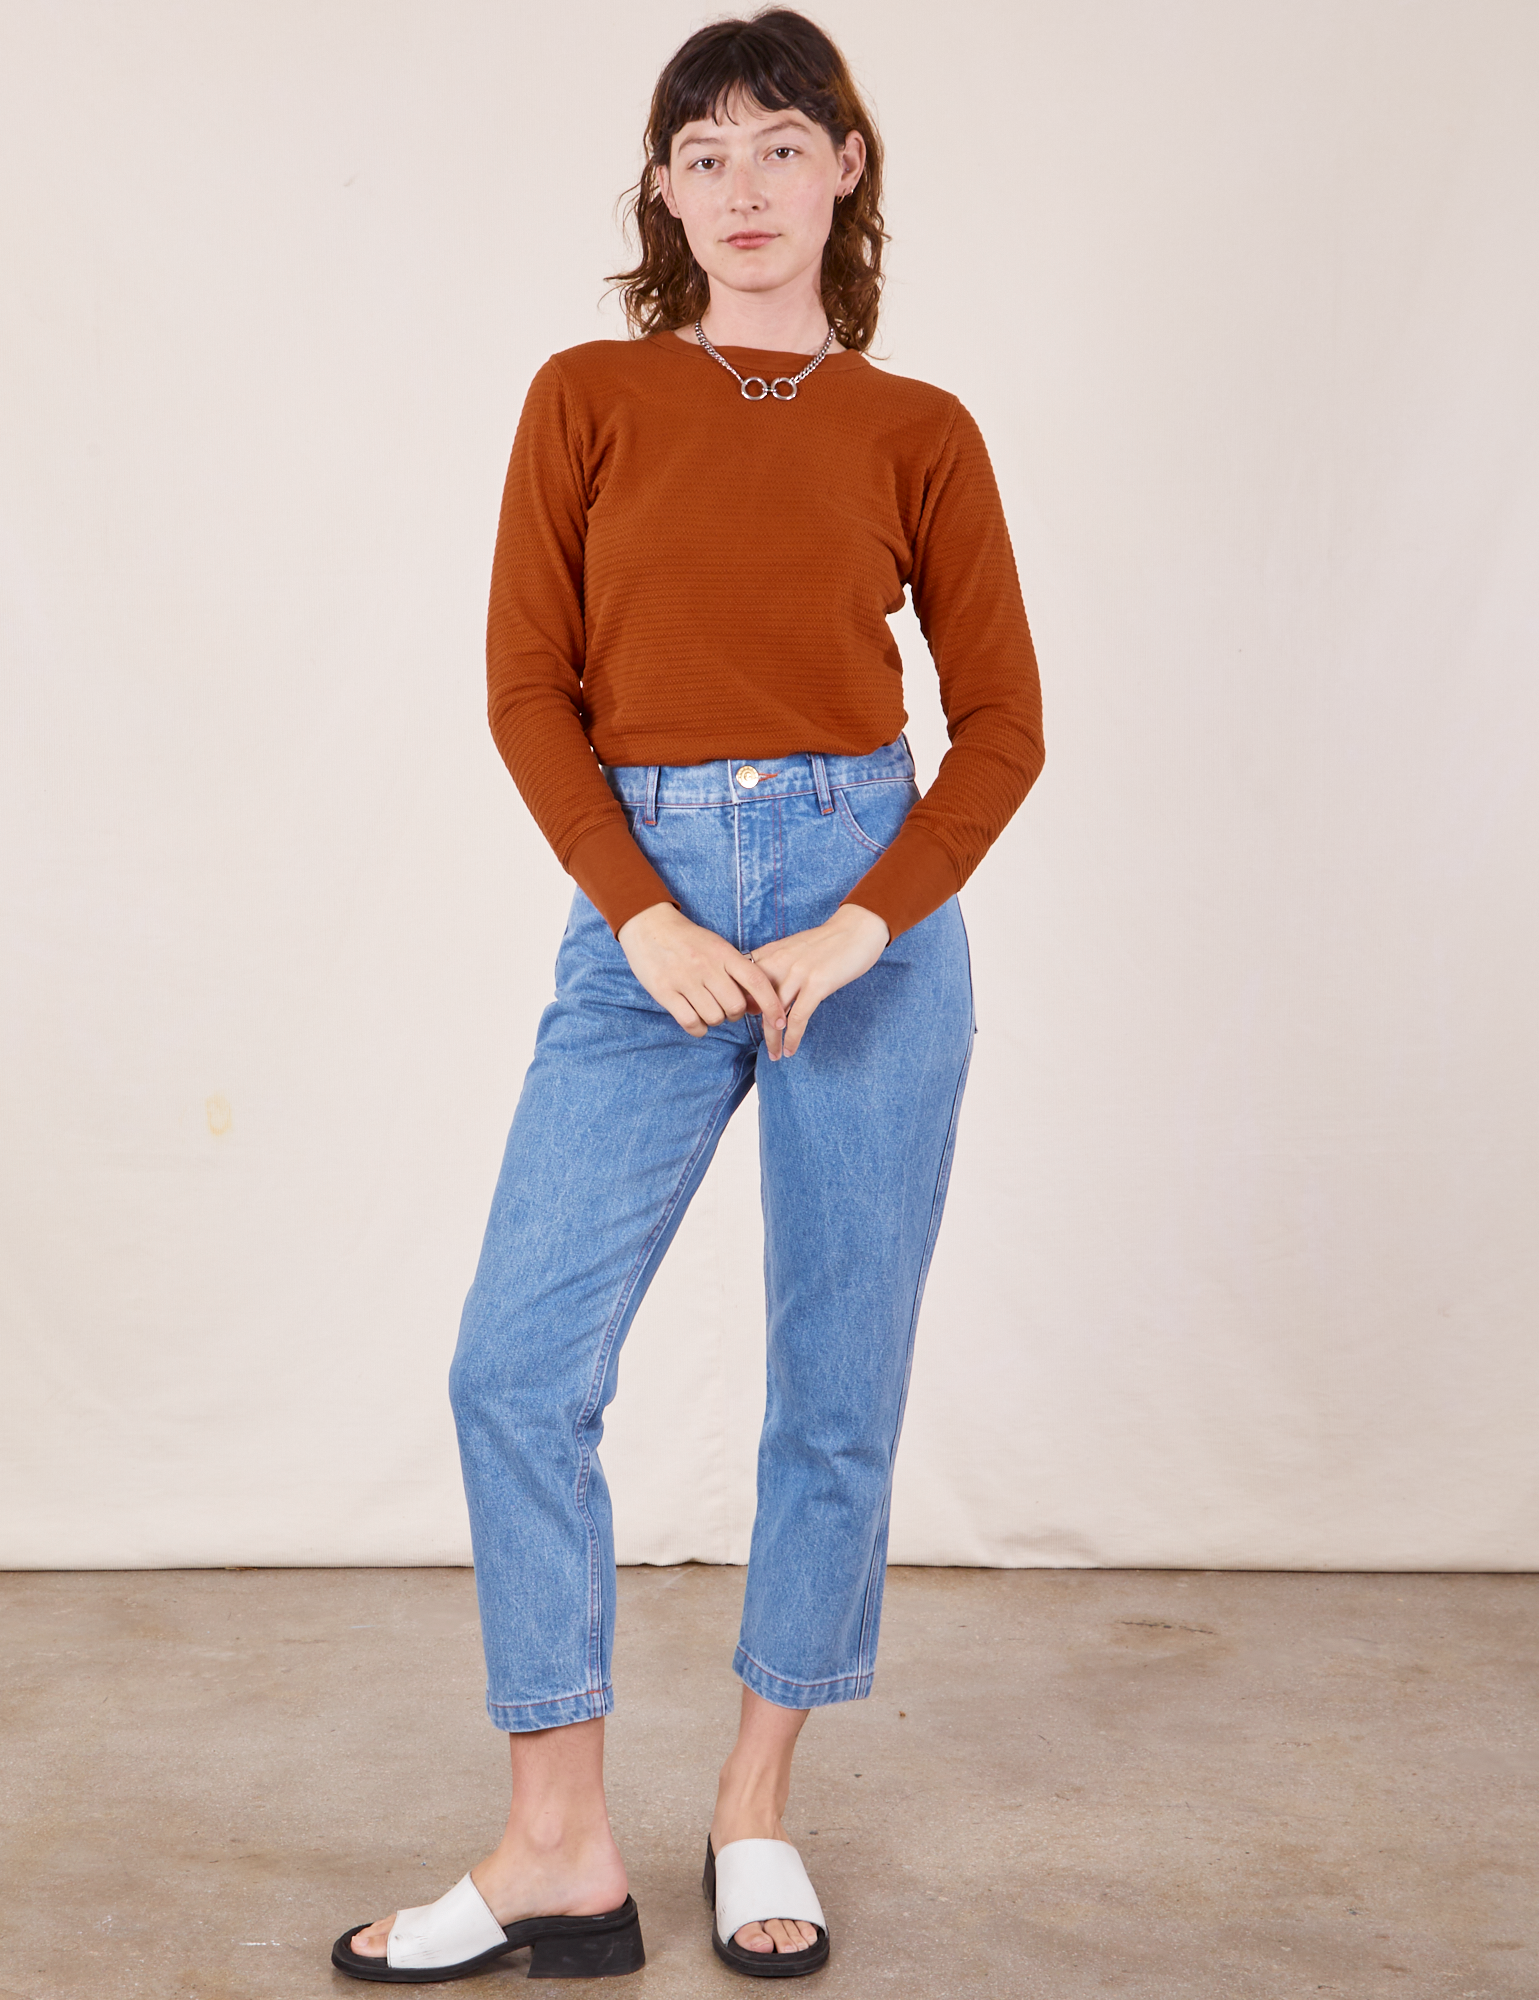 Alex is wearing Honeycomb Thermal in Burnt Terracotta tucked into light wash Frontier Jeans